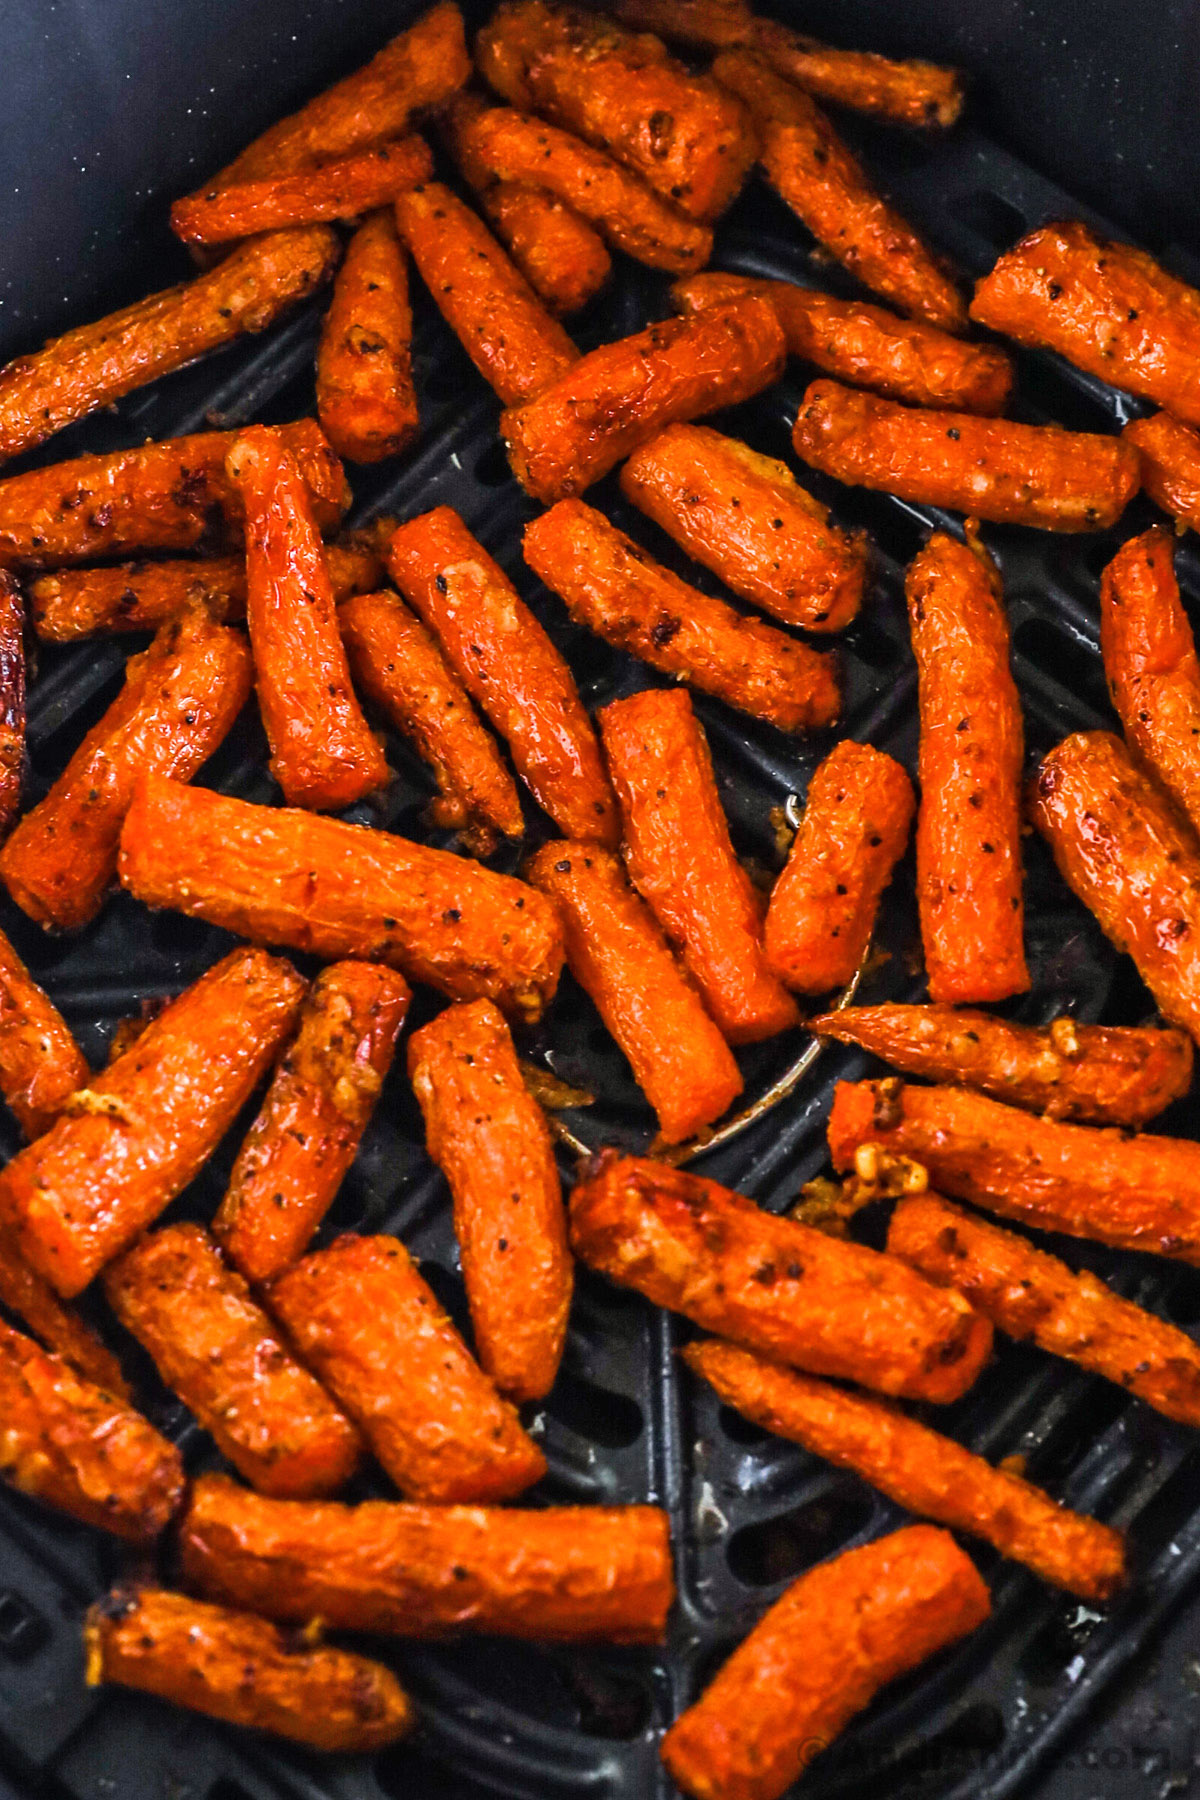 Close up of an air fryer basket with cooked carrots inside,